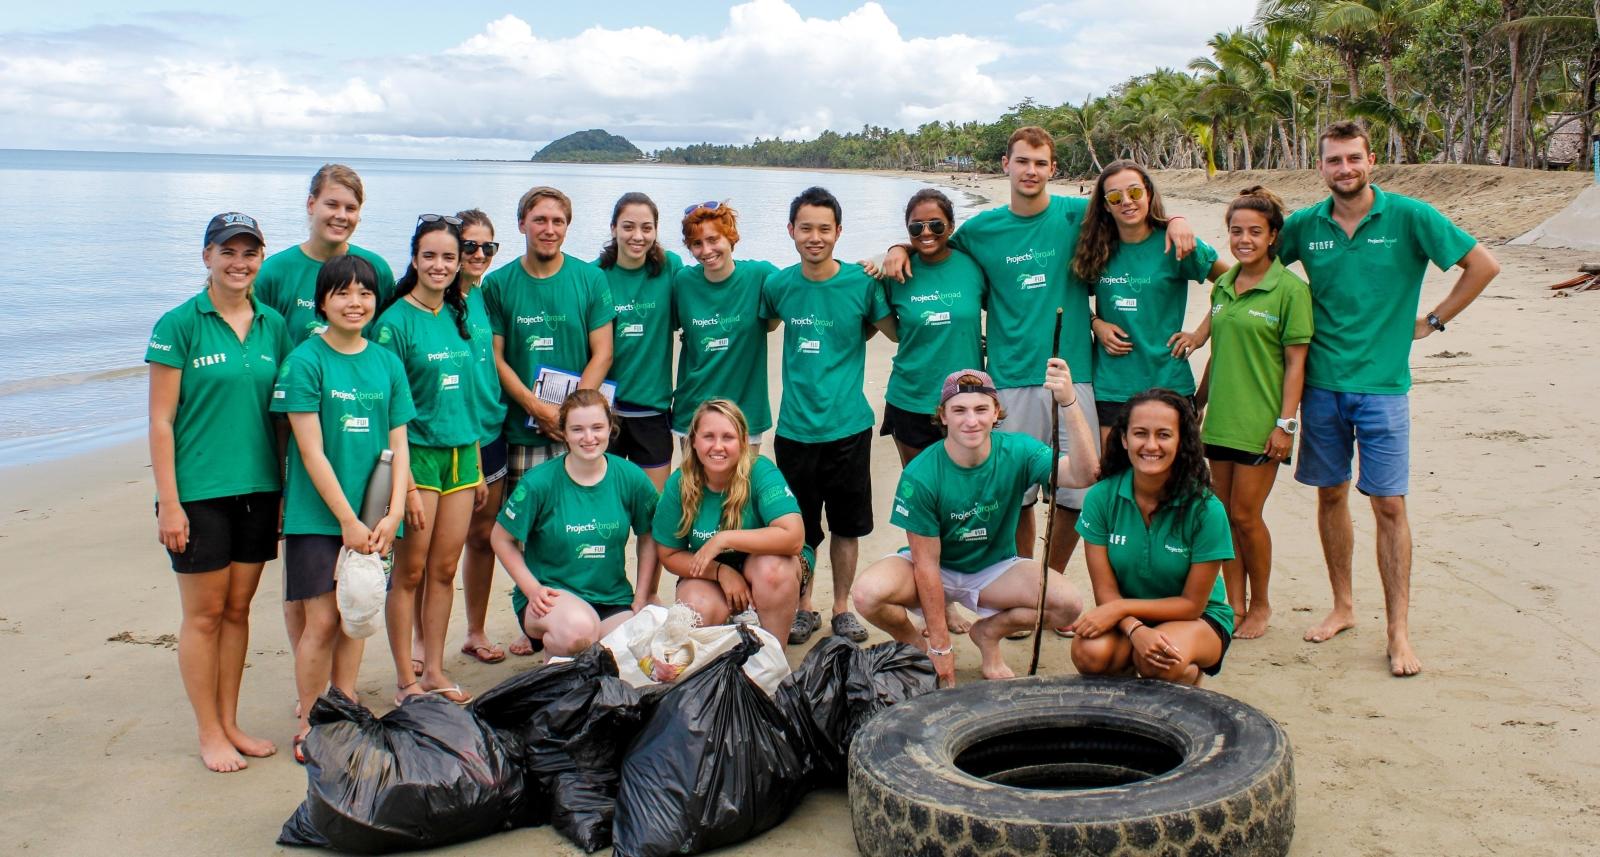 Projects Abroad volunteers pose after a successful beach clean up in Fiji